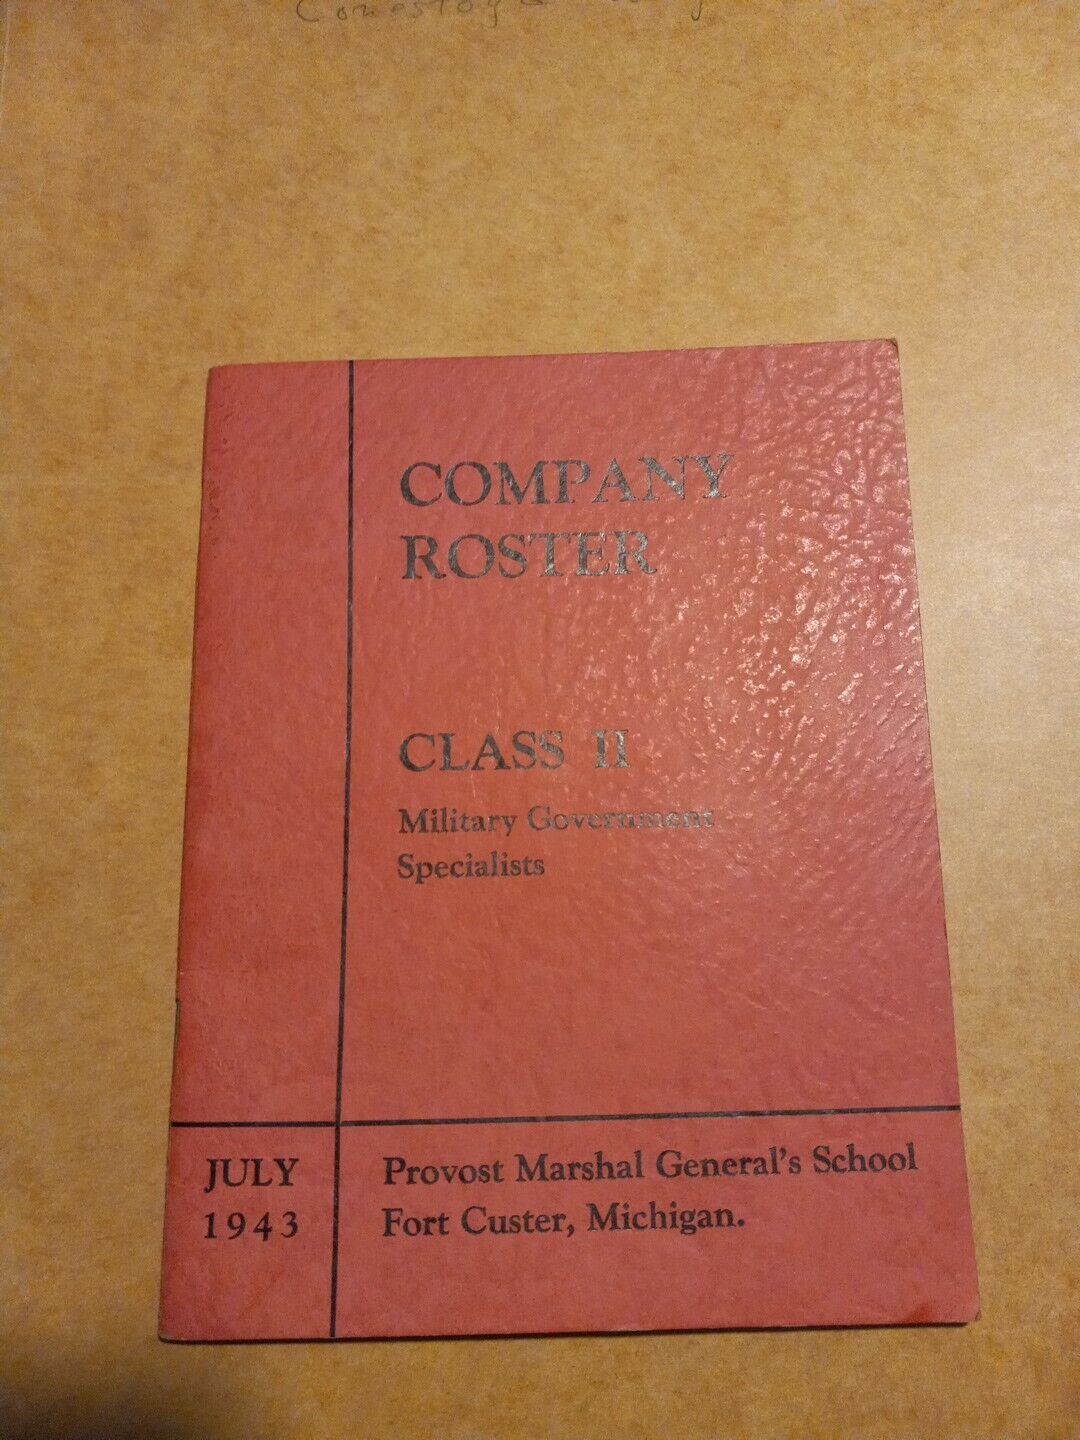 July 1943 Provost Marshal General's School Fort Custer,Michigan Company roster